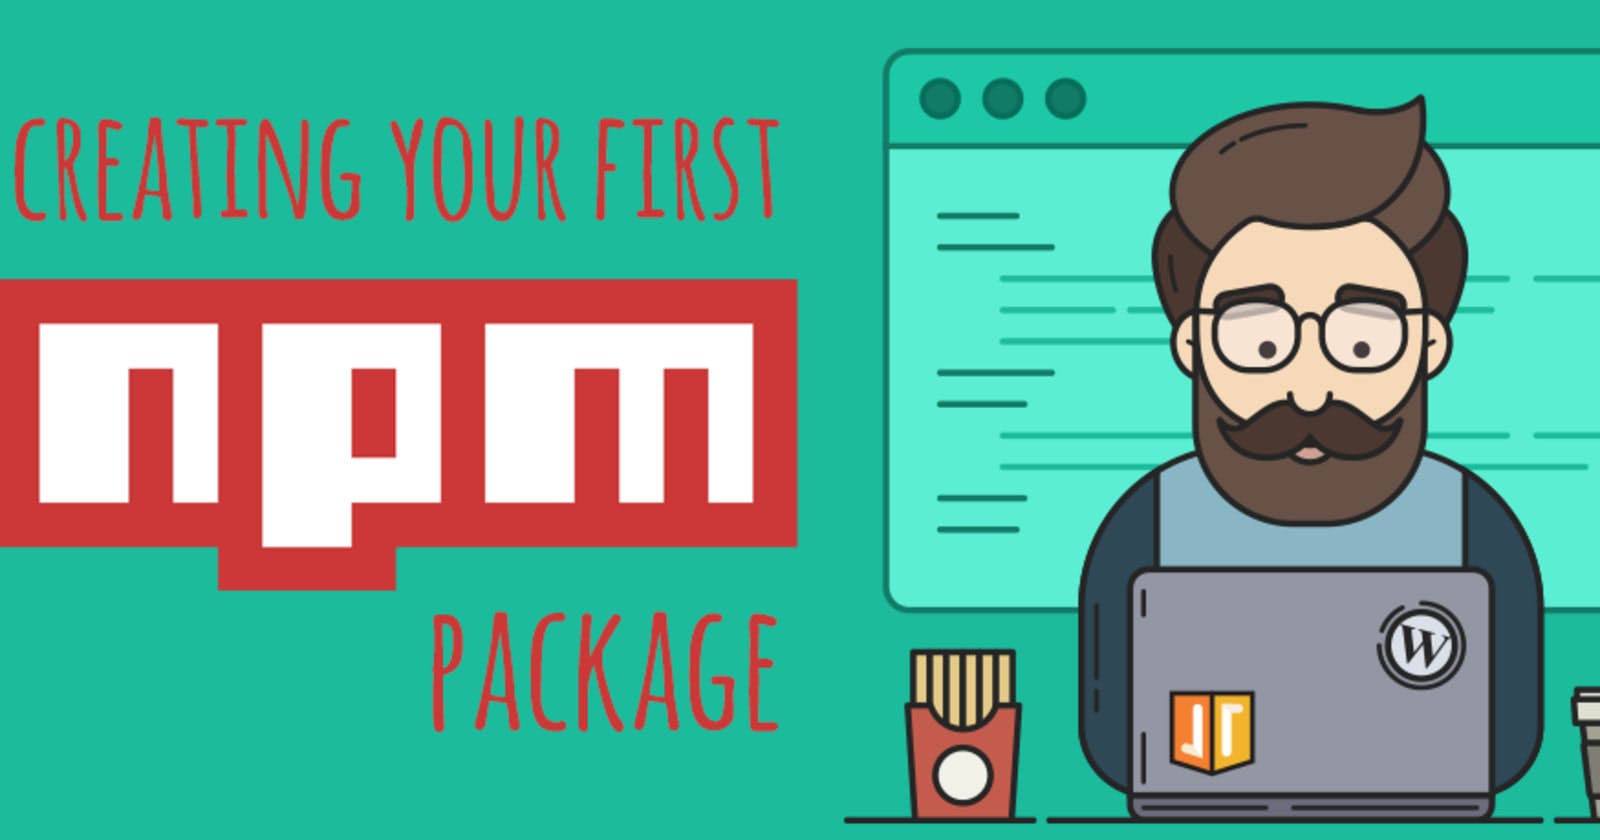 My First NPM Package